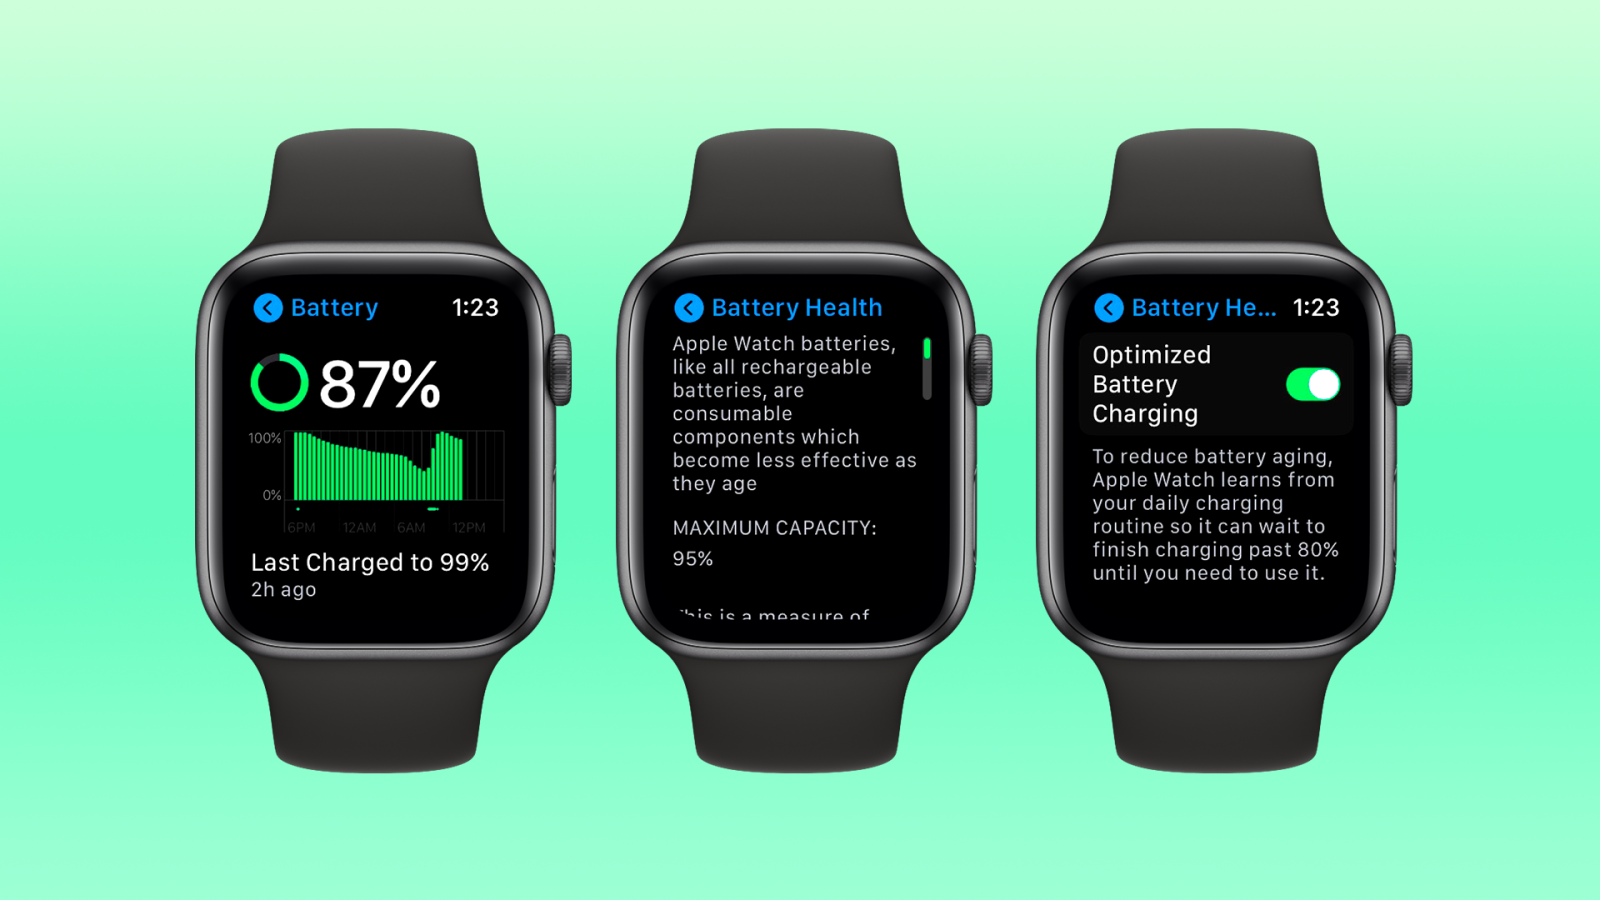 https://9to5mac.com/wp-content/uploads/sites/6/2020/06/watchOS-7-Battery-Health.png?w=1600